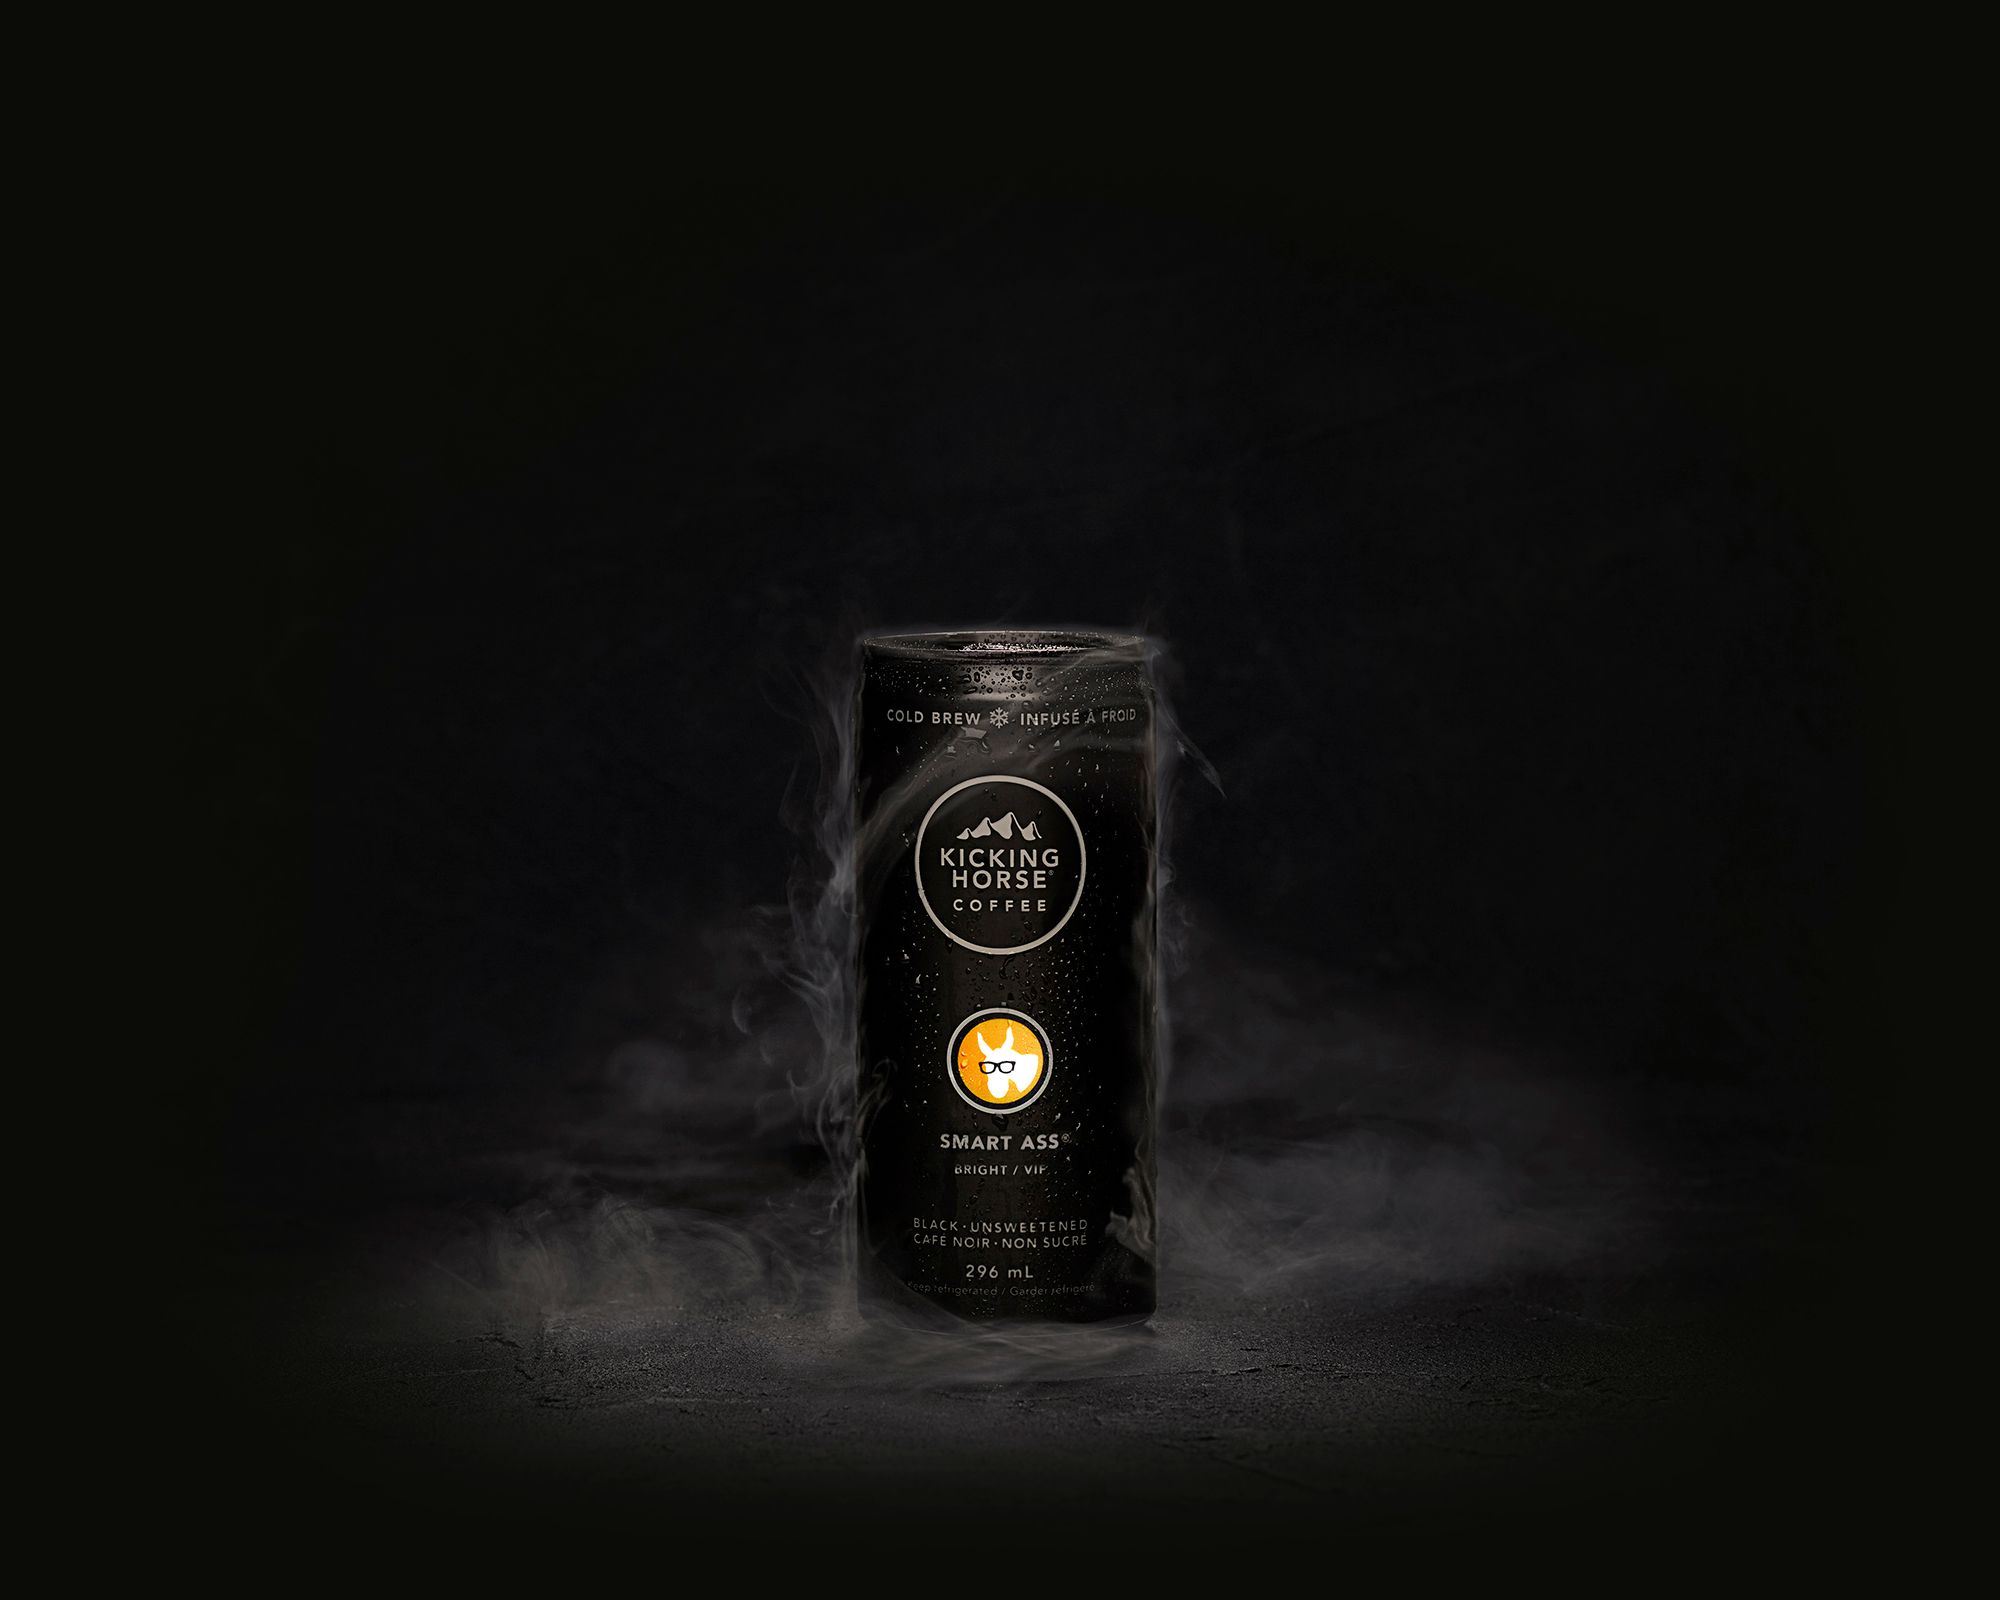 Smart Ass cold brew can with condensation and fog cloud